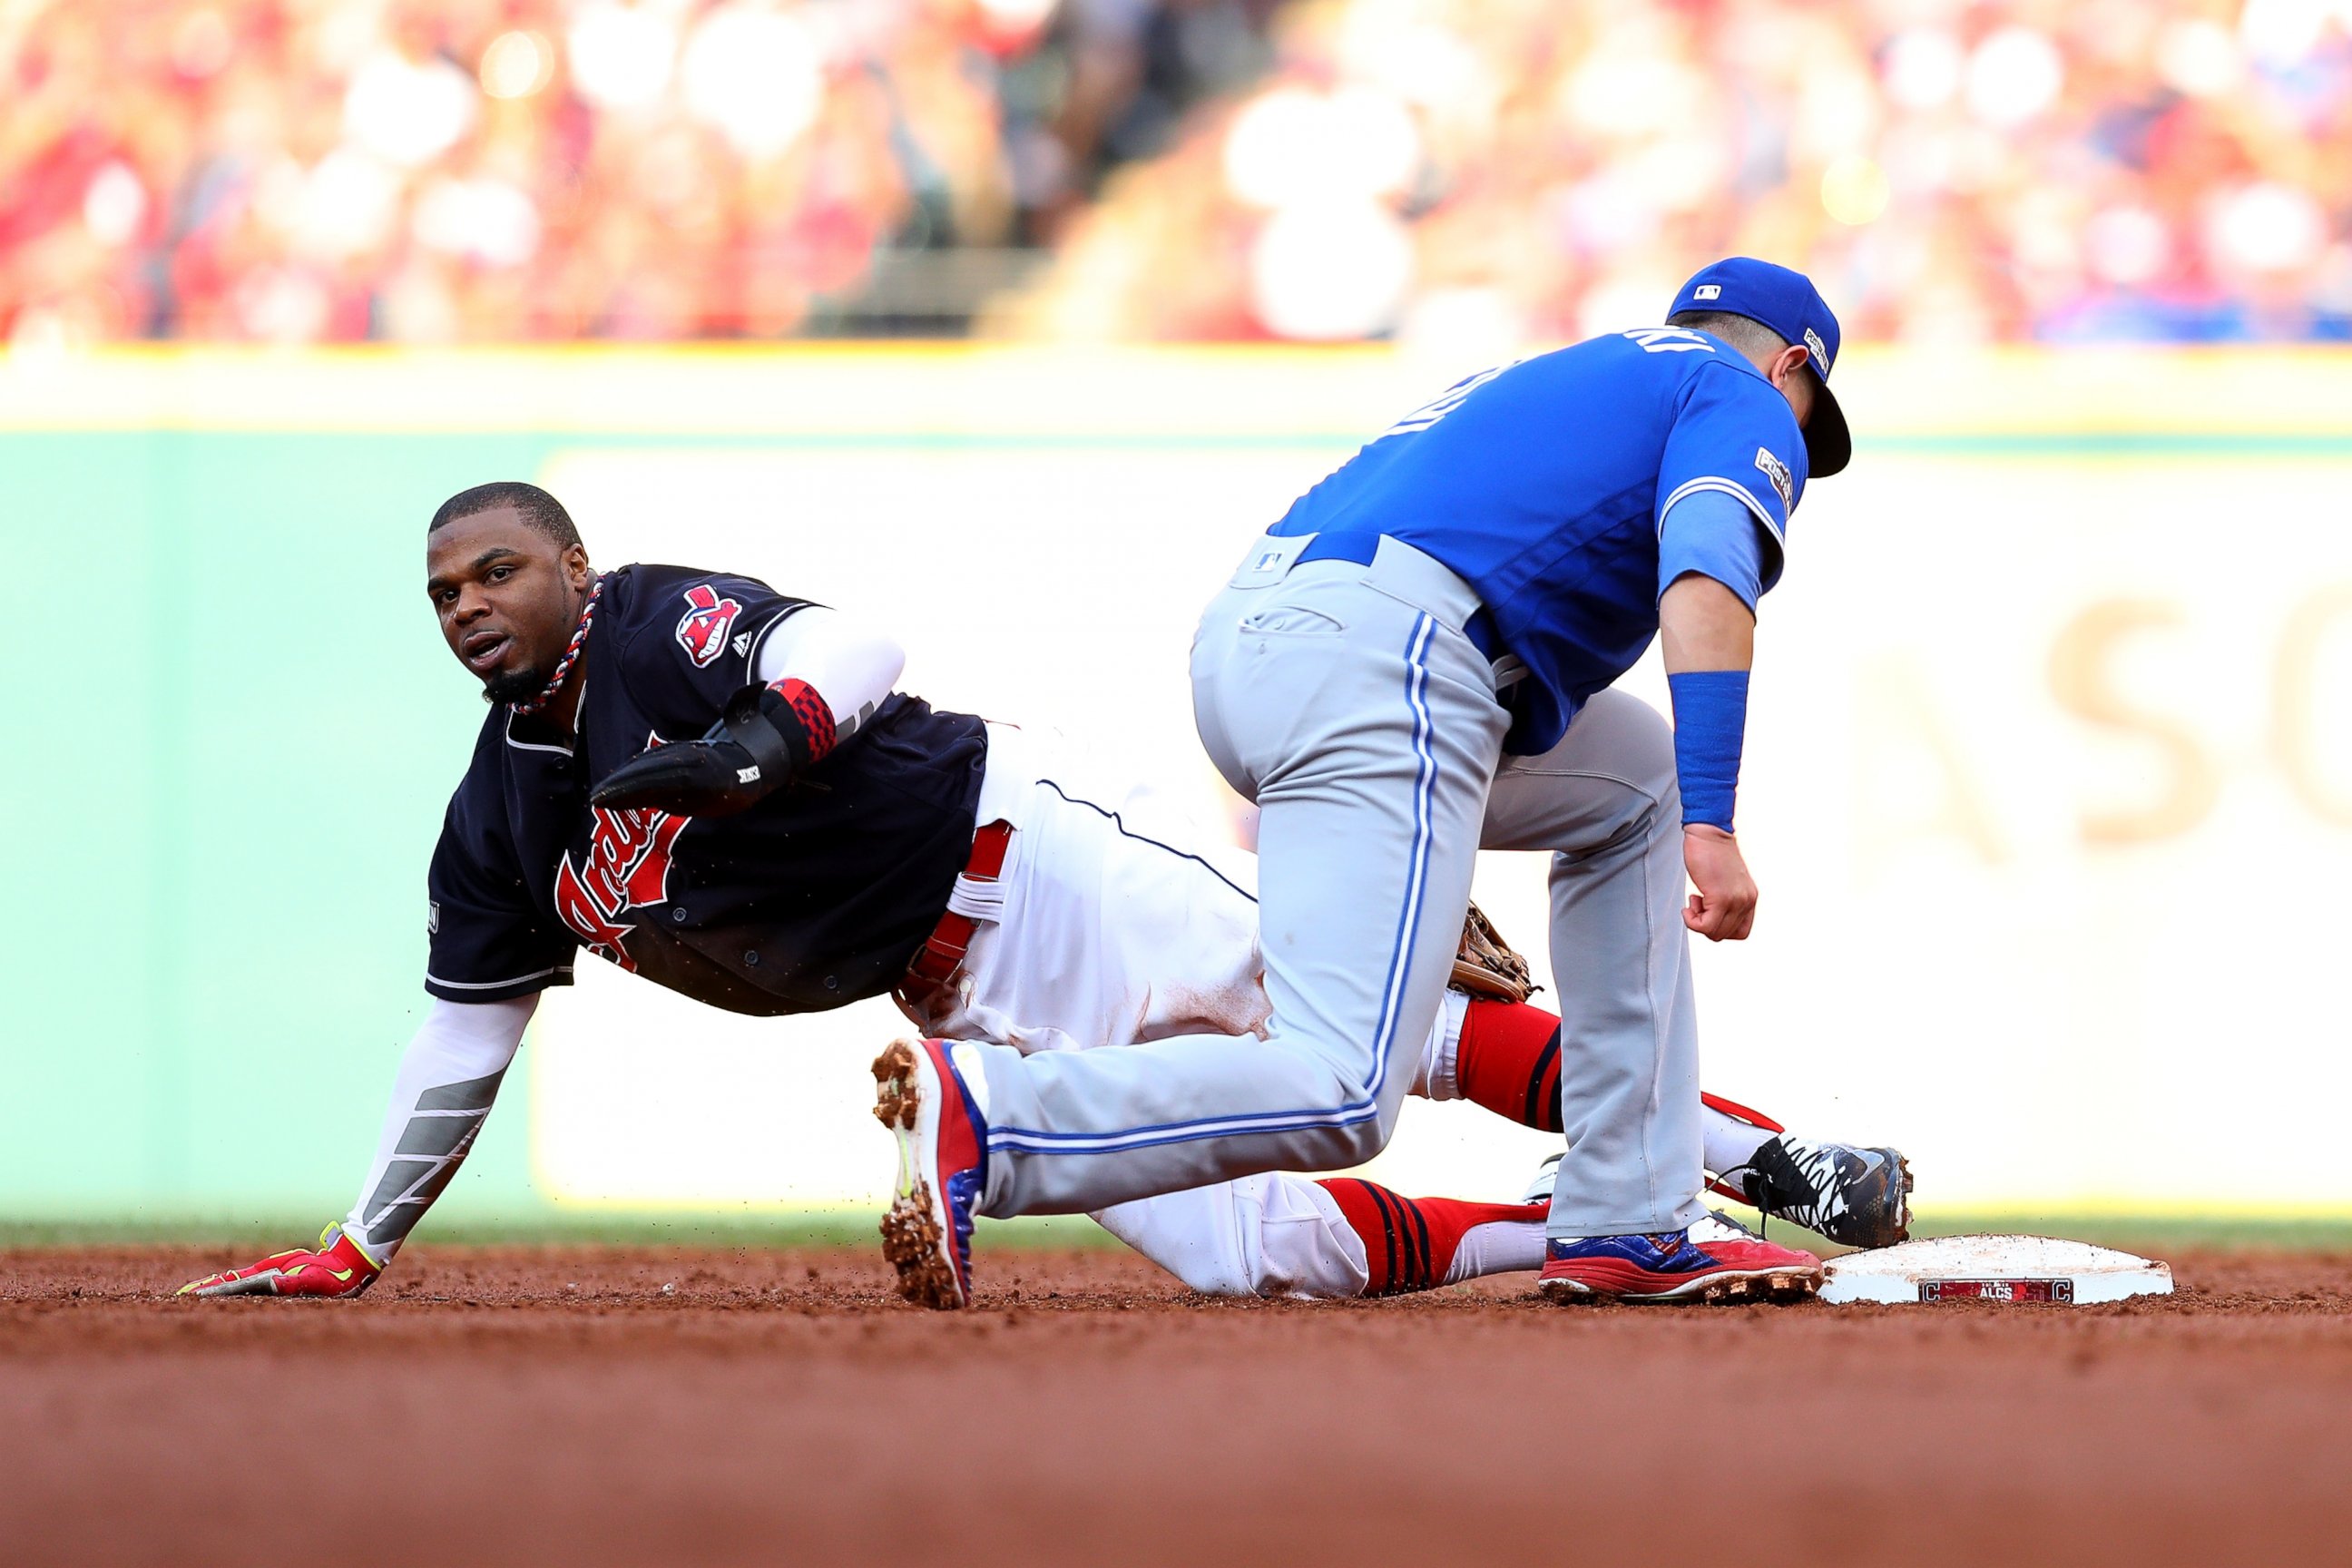 PHOTO: Rajai Davis of the Cleveland Indians steals second base in the third inning against the Toronto Blue Jays during game two of the American League Championship Series at Progressive Field on October 15, 2016 in Cleveland, OH.